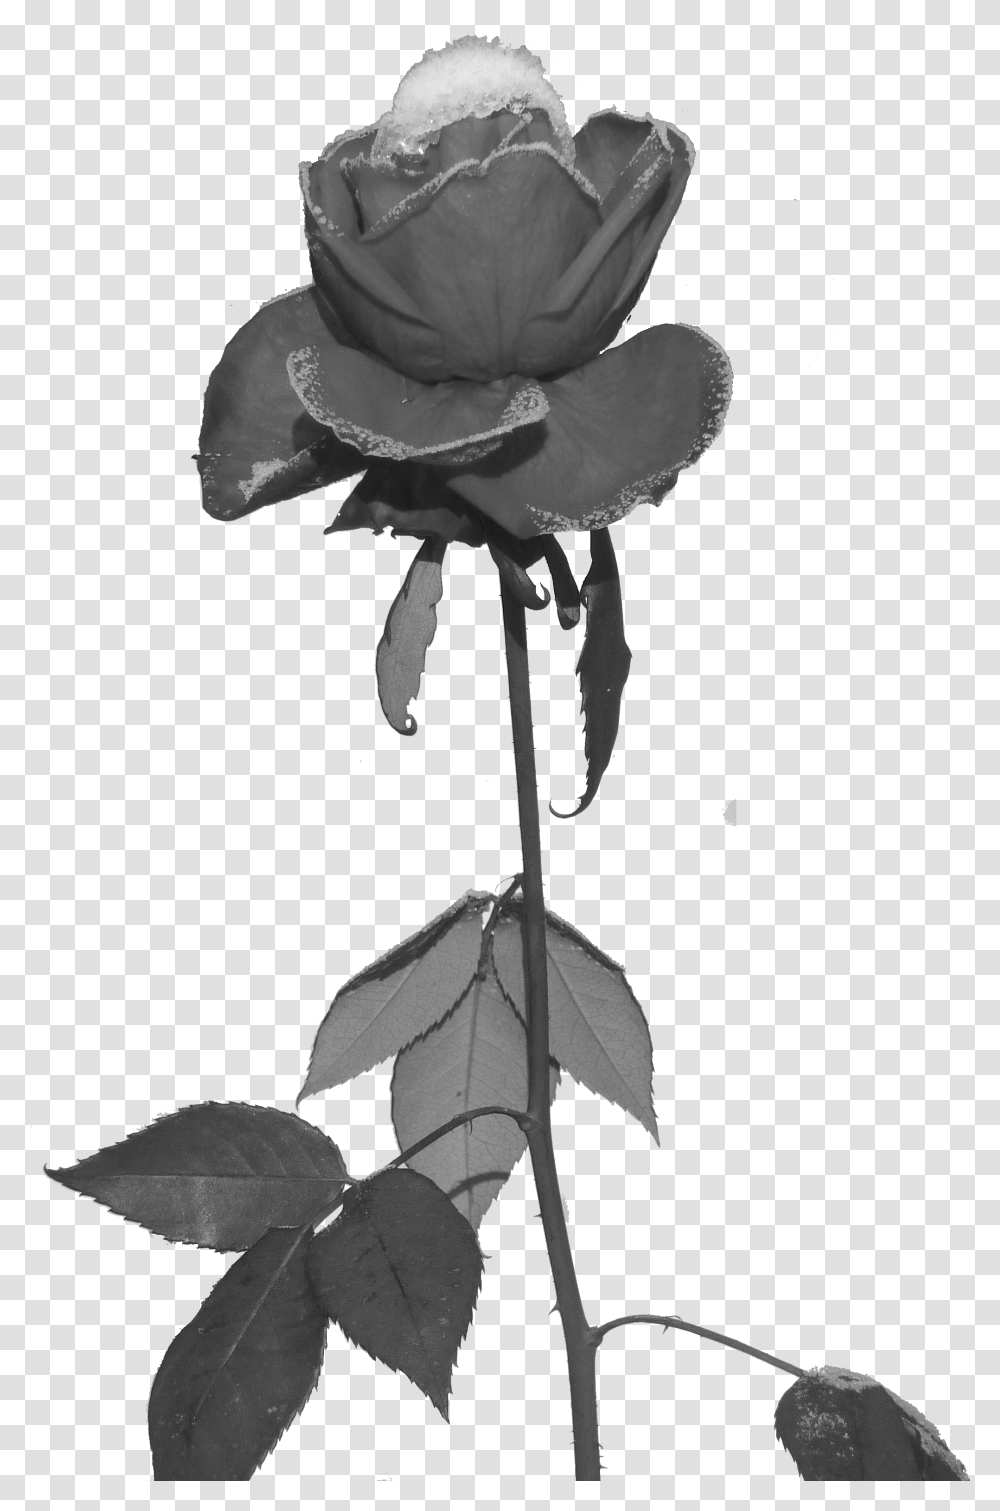 Filerose Und Eis Freigestelltpng Wikimedia Commons Black Rose, Plant, Flower, Blossom, Acanthaceae Transparent Png